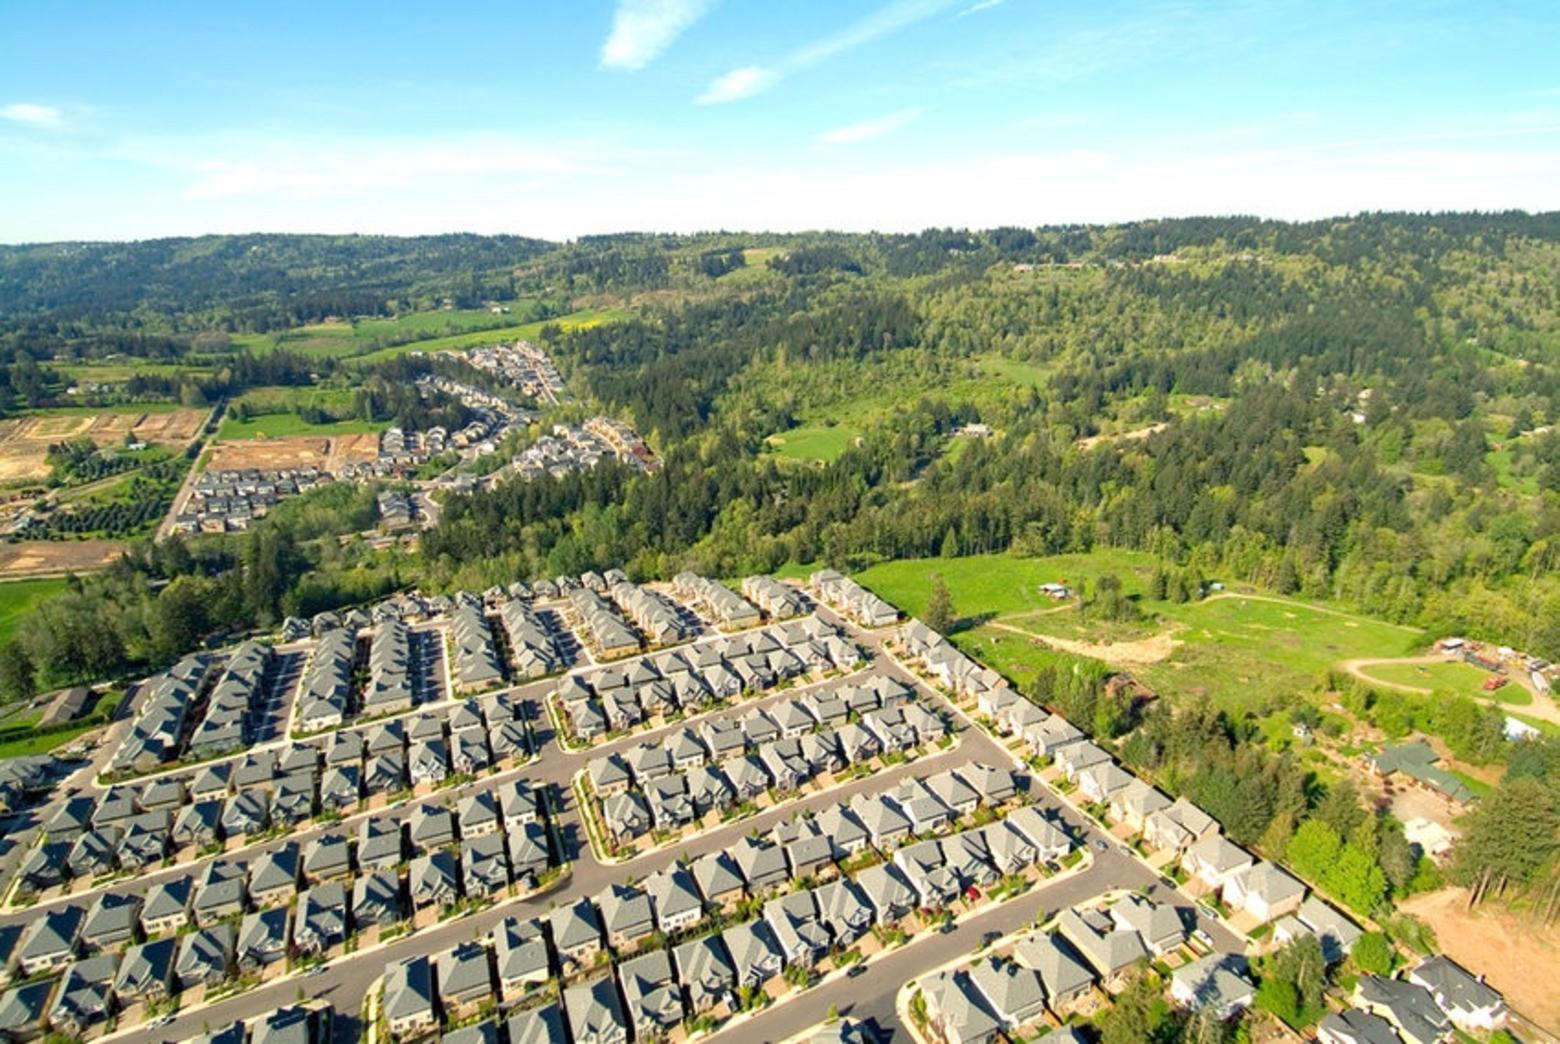 Another view of an urban growth boundary in Oregon where a town is surrounded by ag fields and forests, the latter without an invasion of homes that degrade wildlife habitat and are at high risk to loss from wildfire.